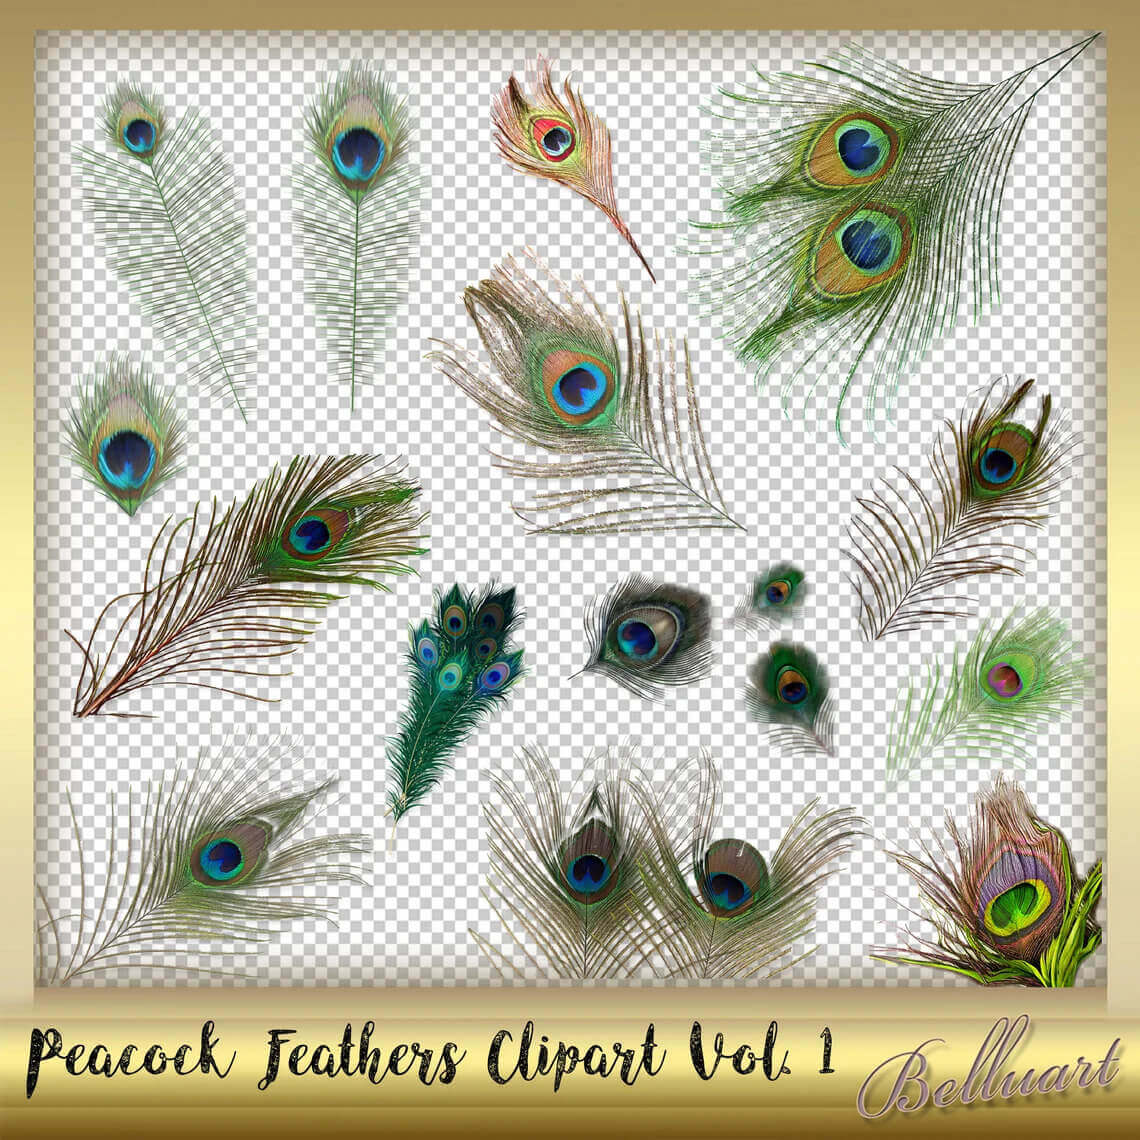 Collection of peacock feathers clipart vol 1.